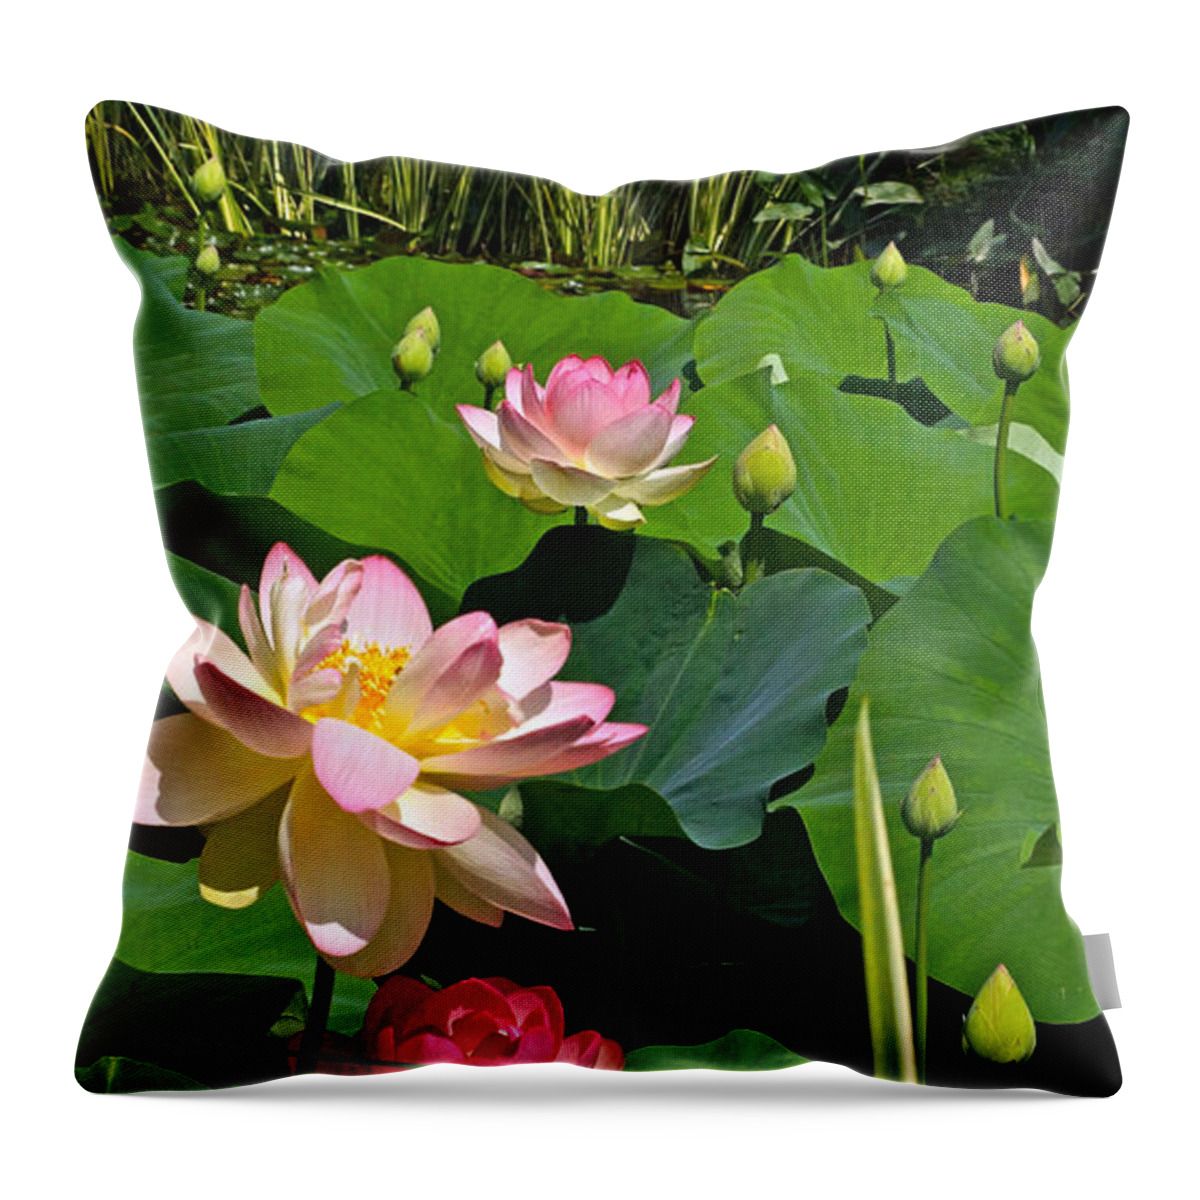 Lotuses Throw Pillow featuring the photograph Fourth Of July Lotus Pond view C by Byron Varvarigos